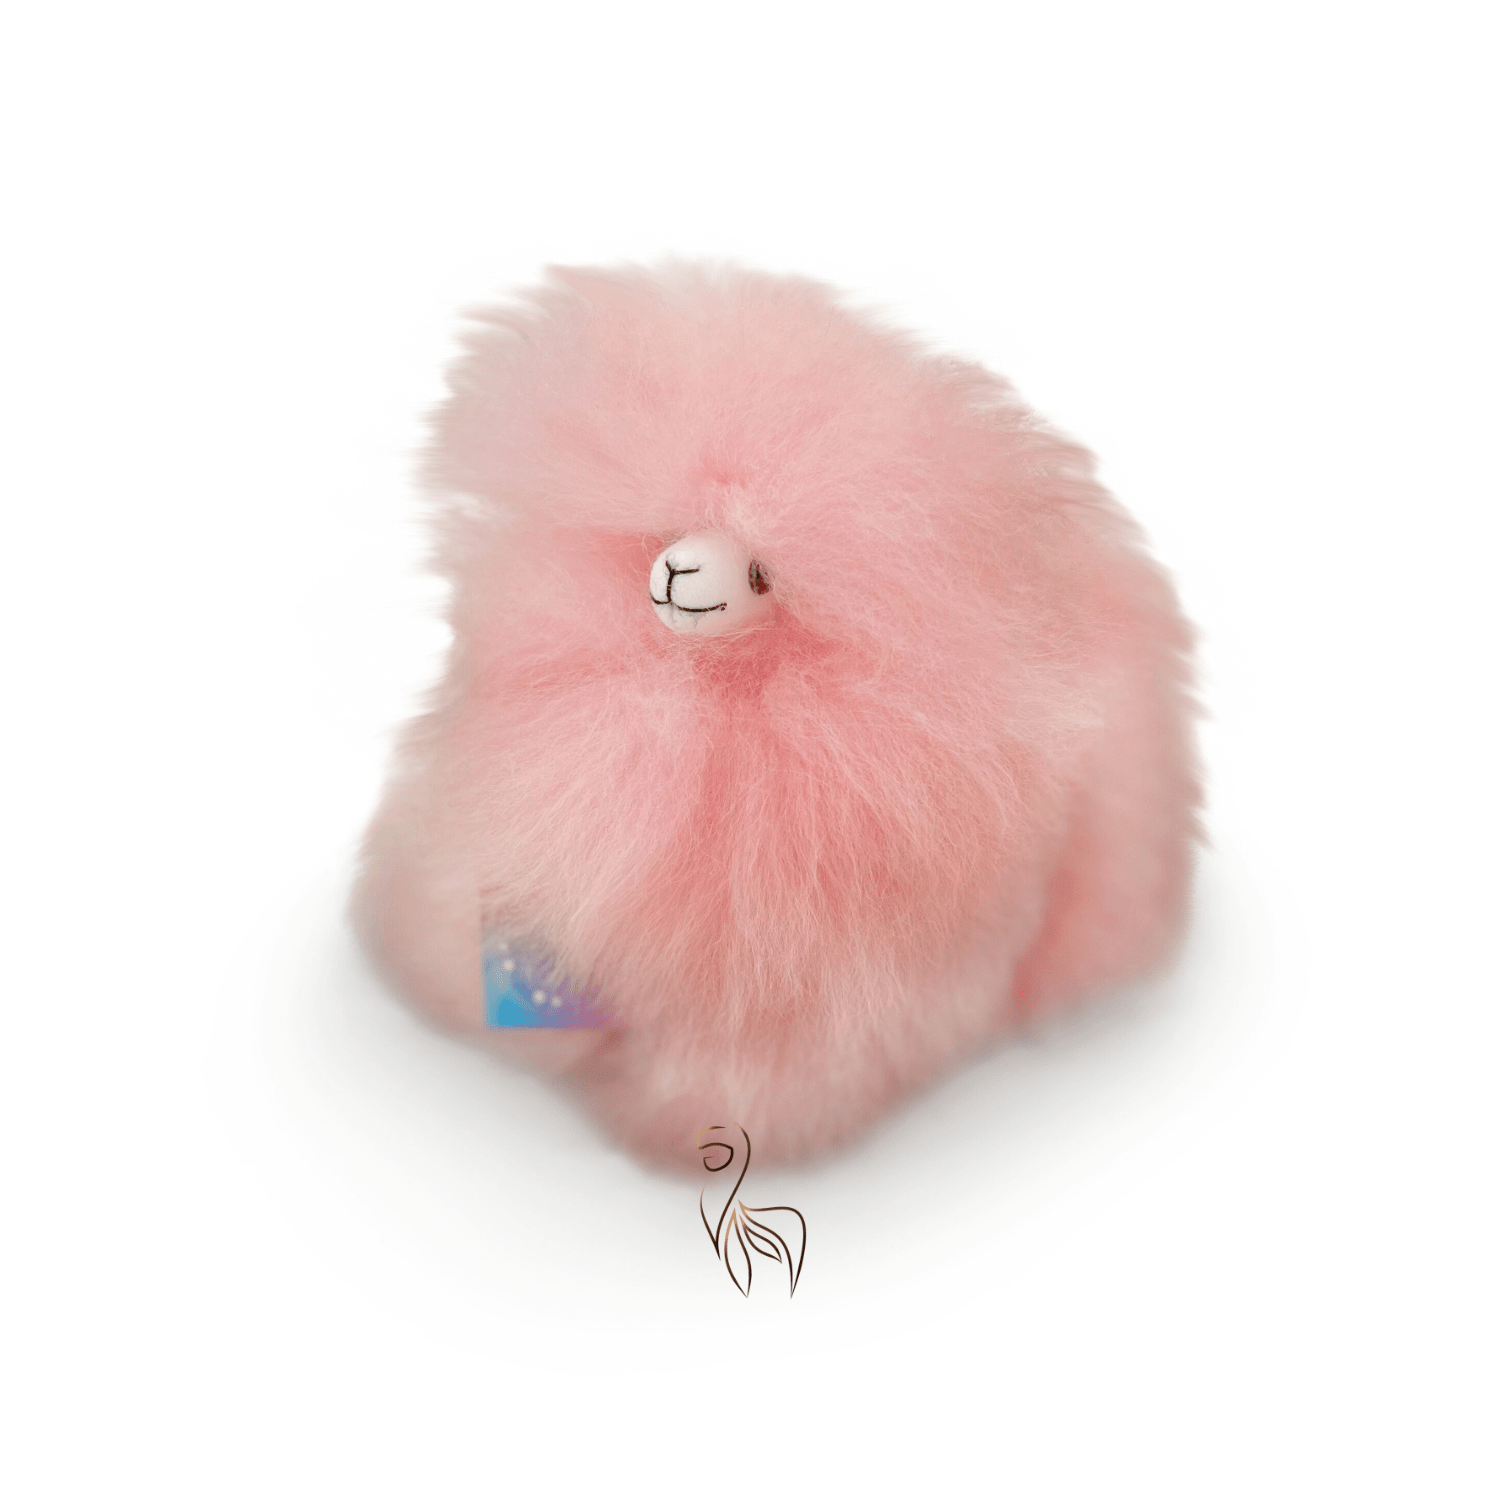 Monsterfluff Cotton Candy - Mini Alpaca Toy (15cm) - Limited Edition